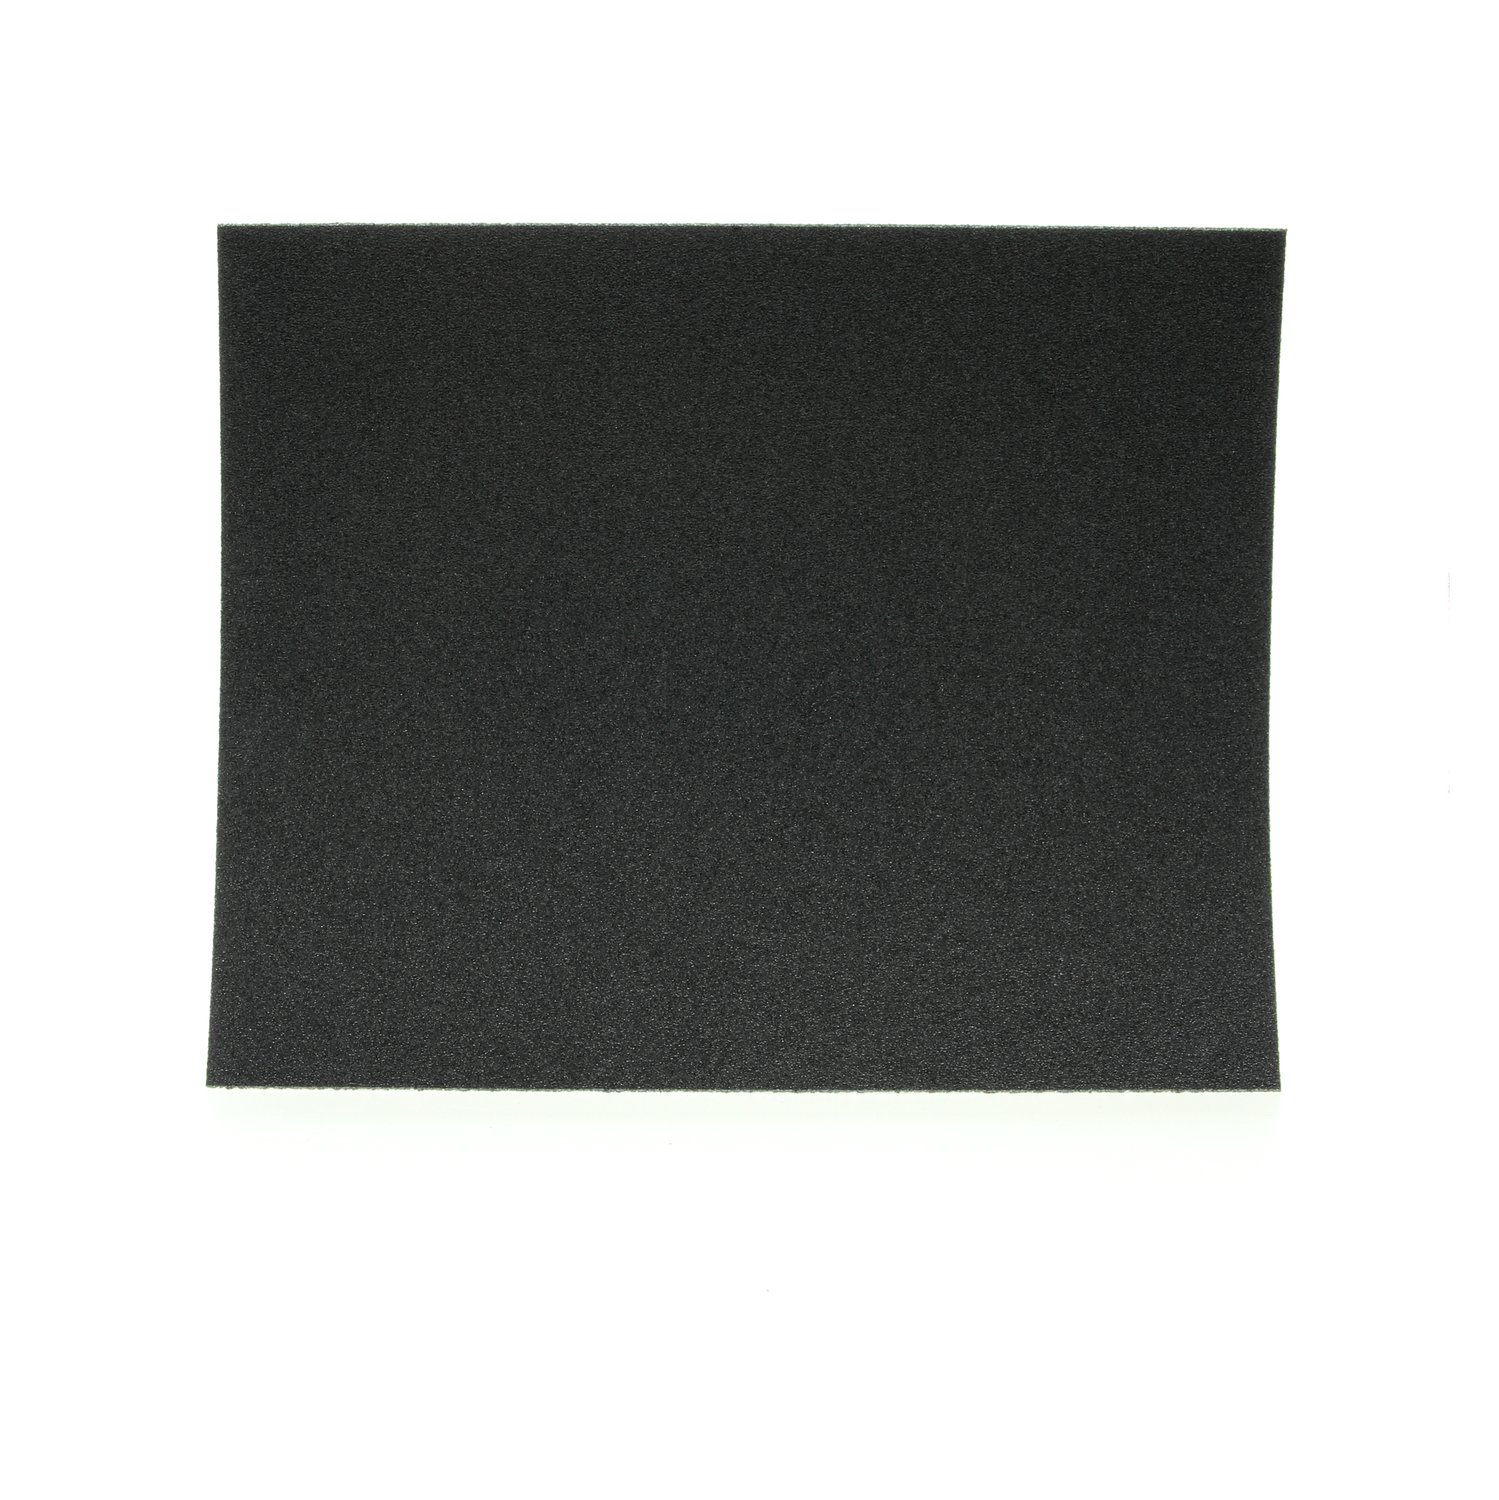 7000118312 - 3M Wetordry Paper Sheet 431Q, 100 C-weight, 9 in x 11 in, 50/Pac, 250
ea/Case